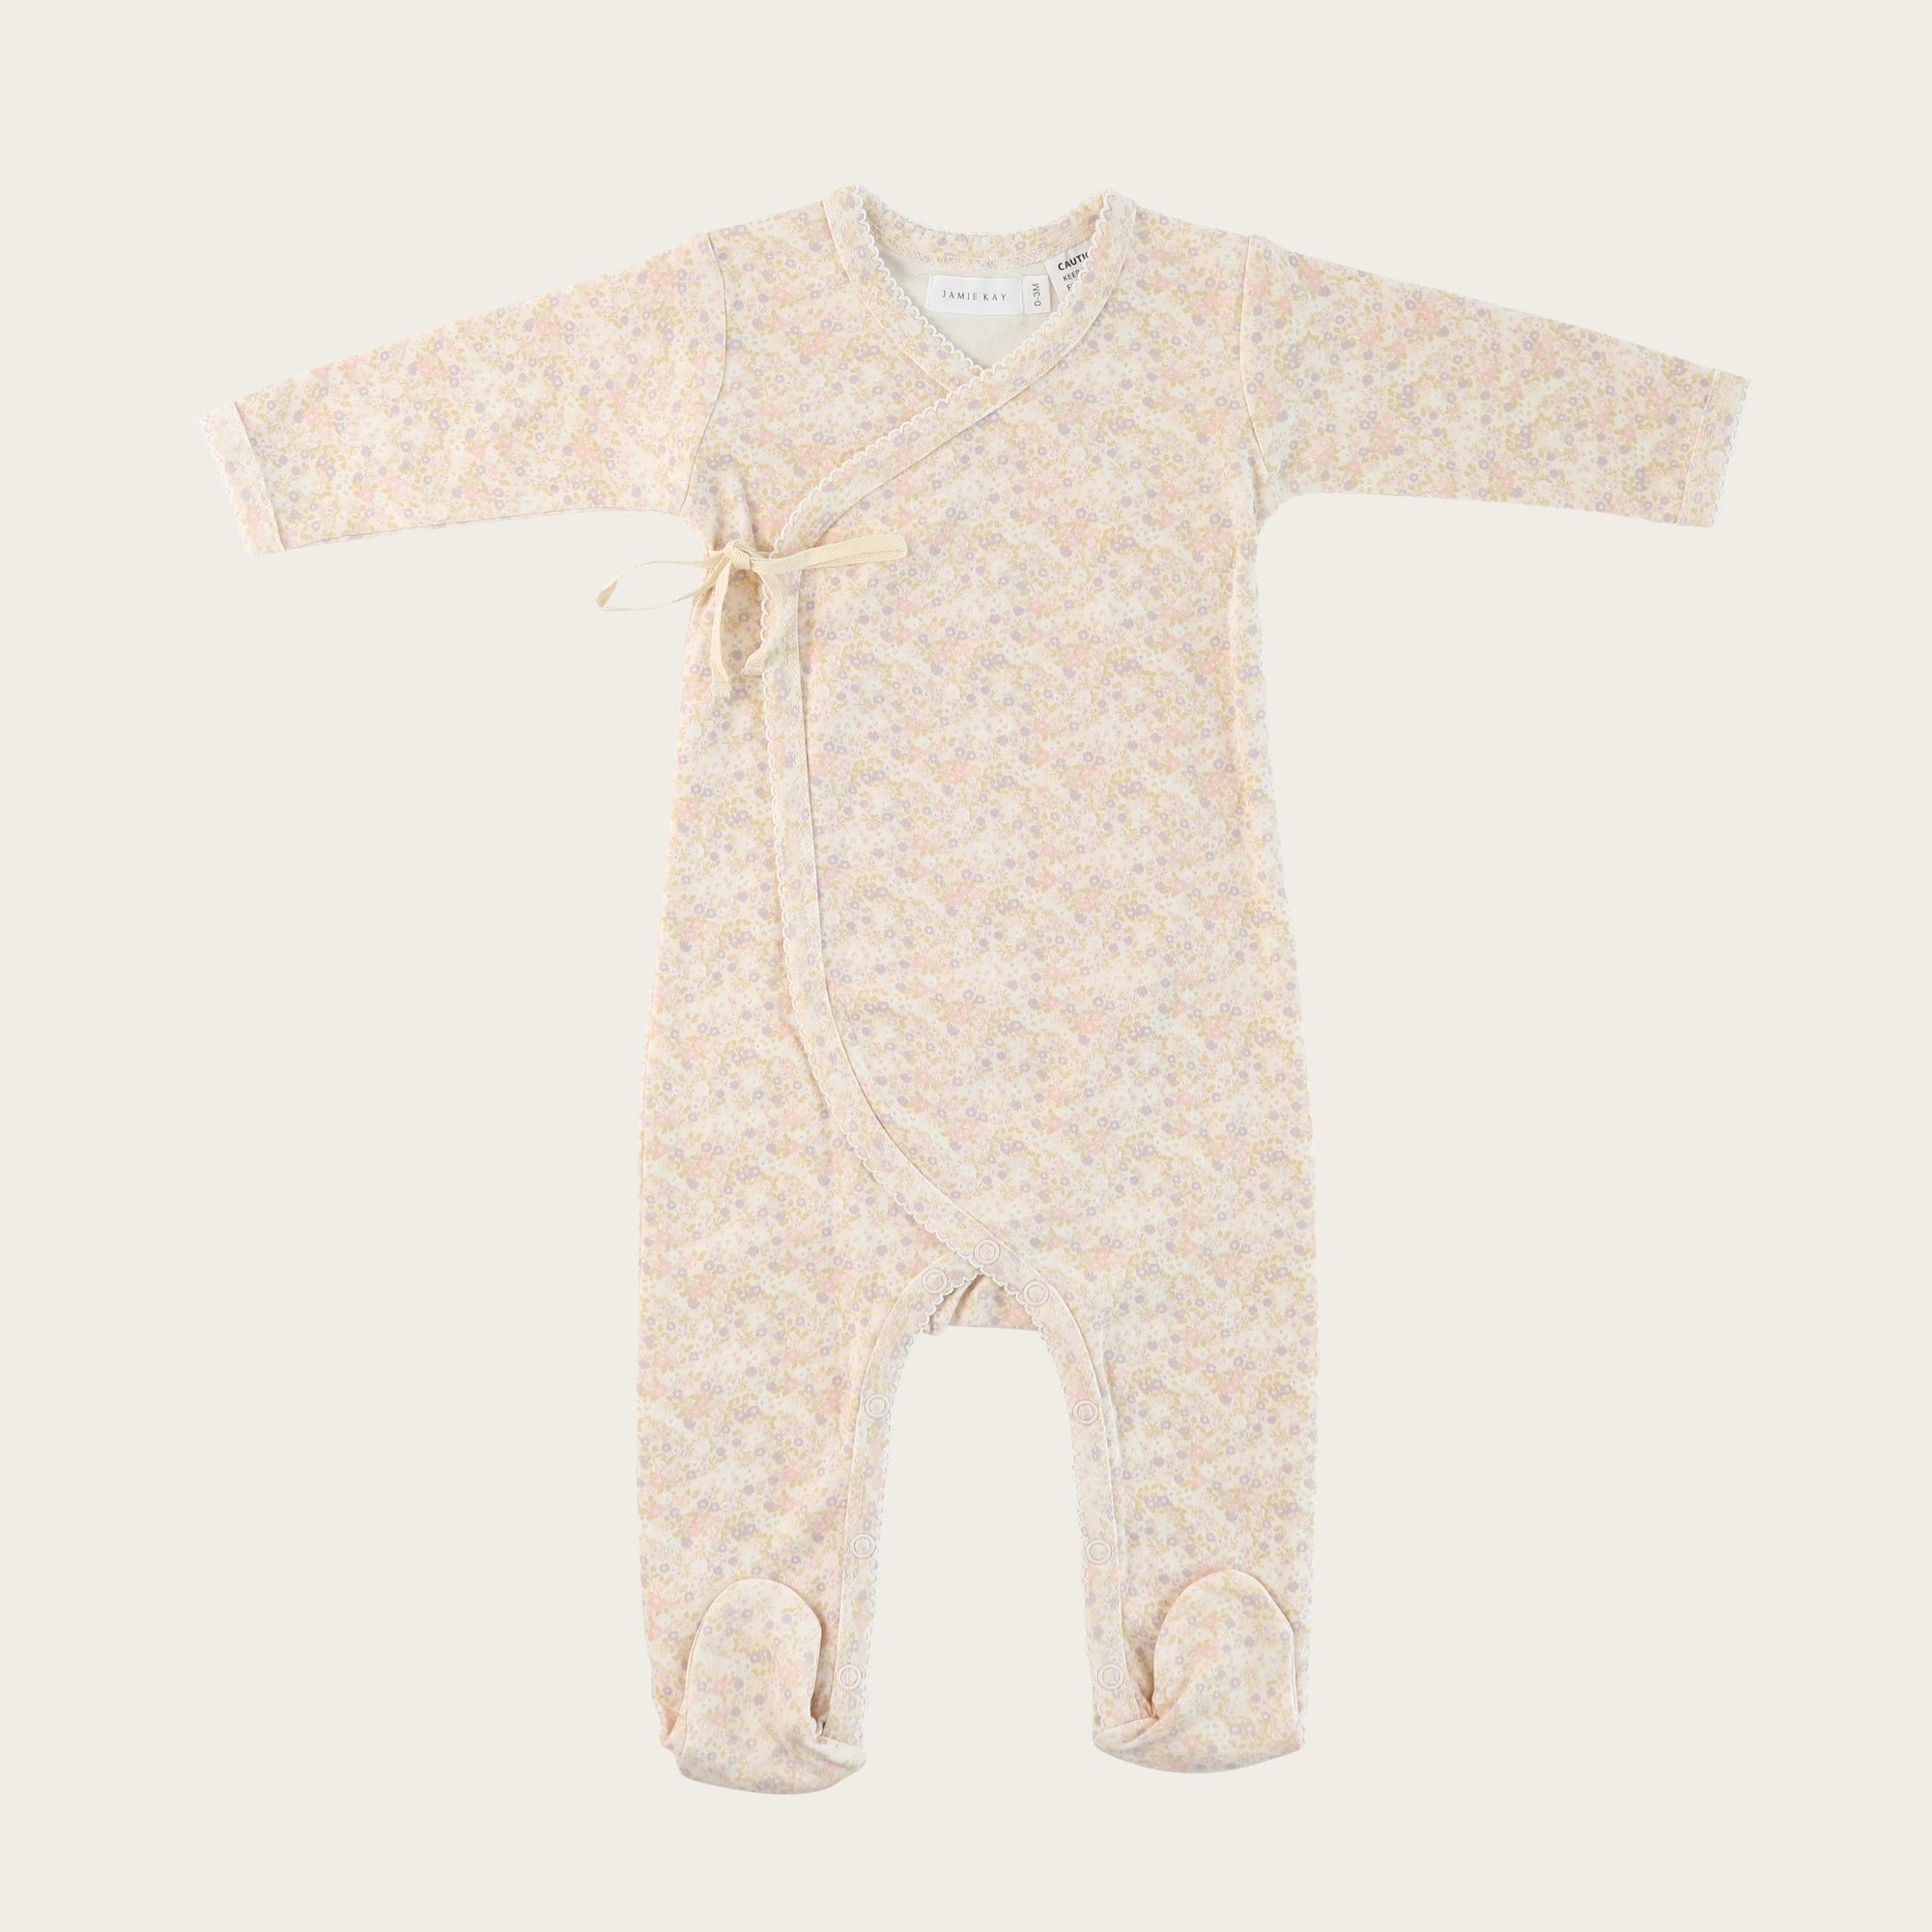 Forget Me Not Wrap Onesie